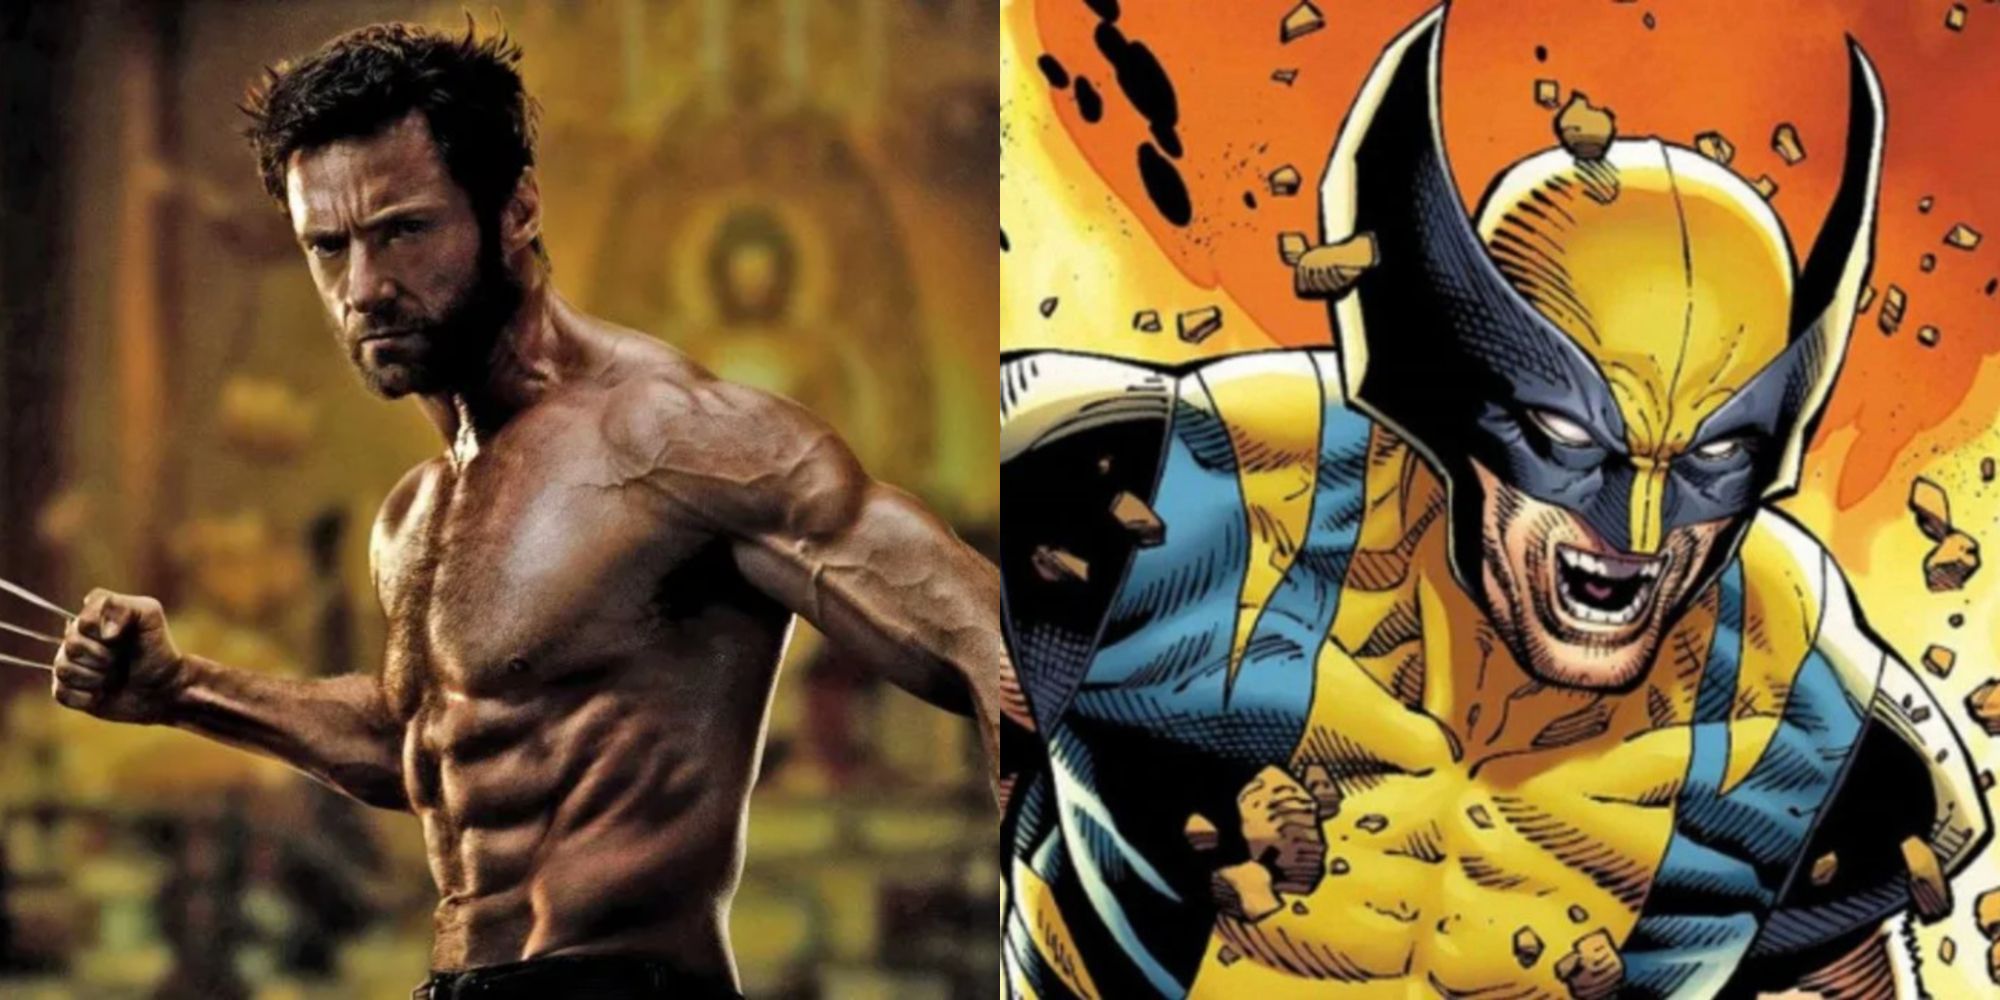 Manga 14 Movie Facts About Wolverine That People Commonly Mistake For ...